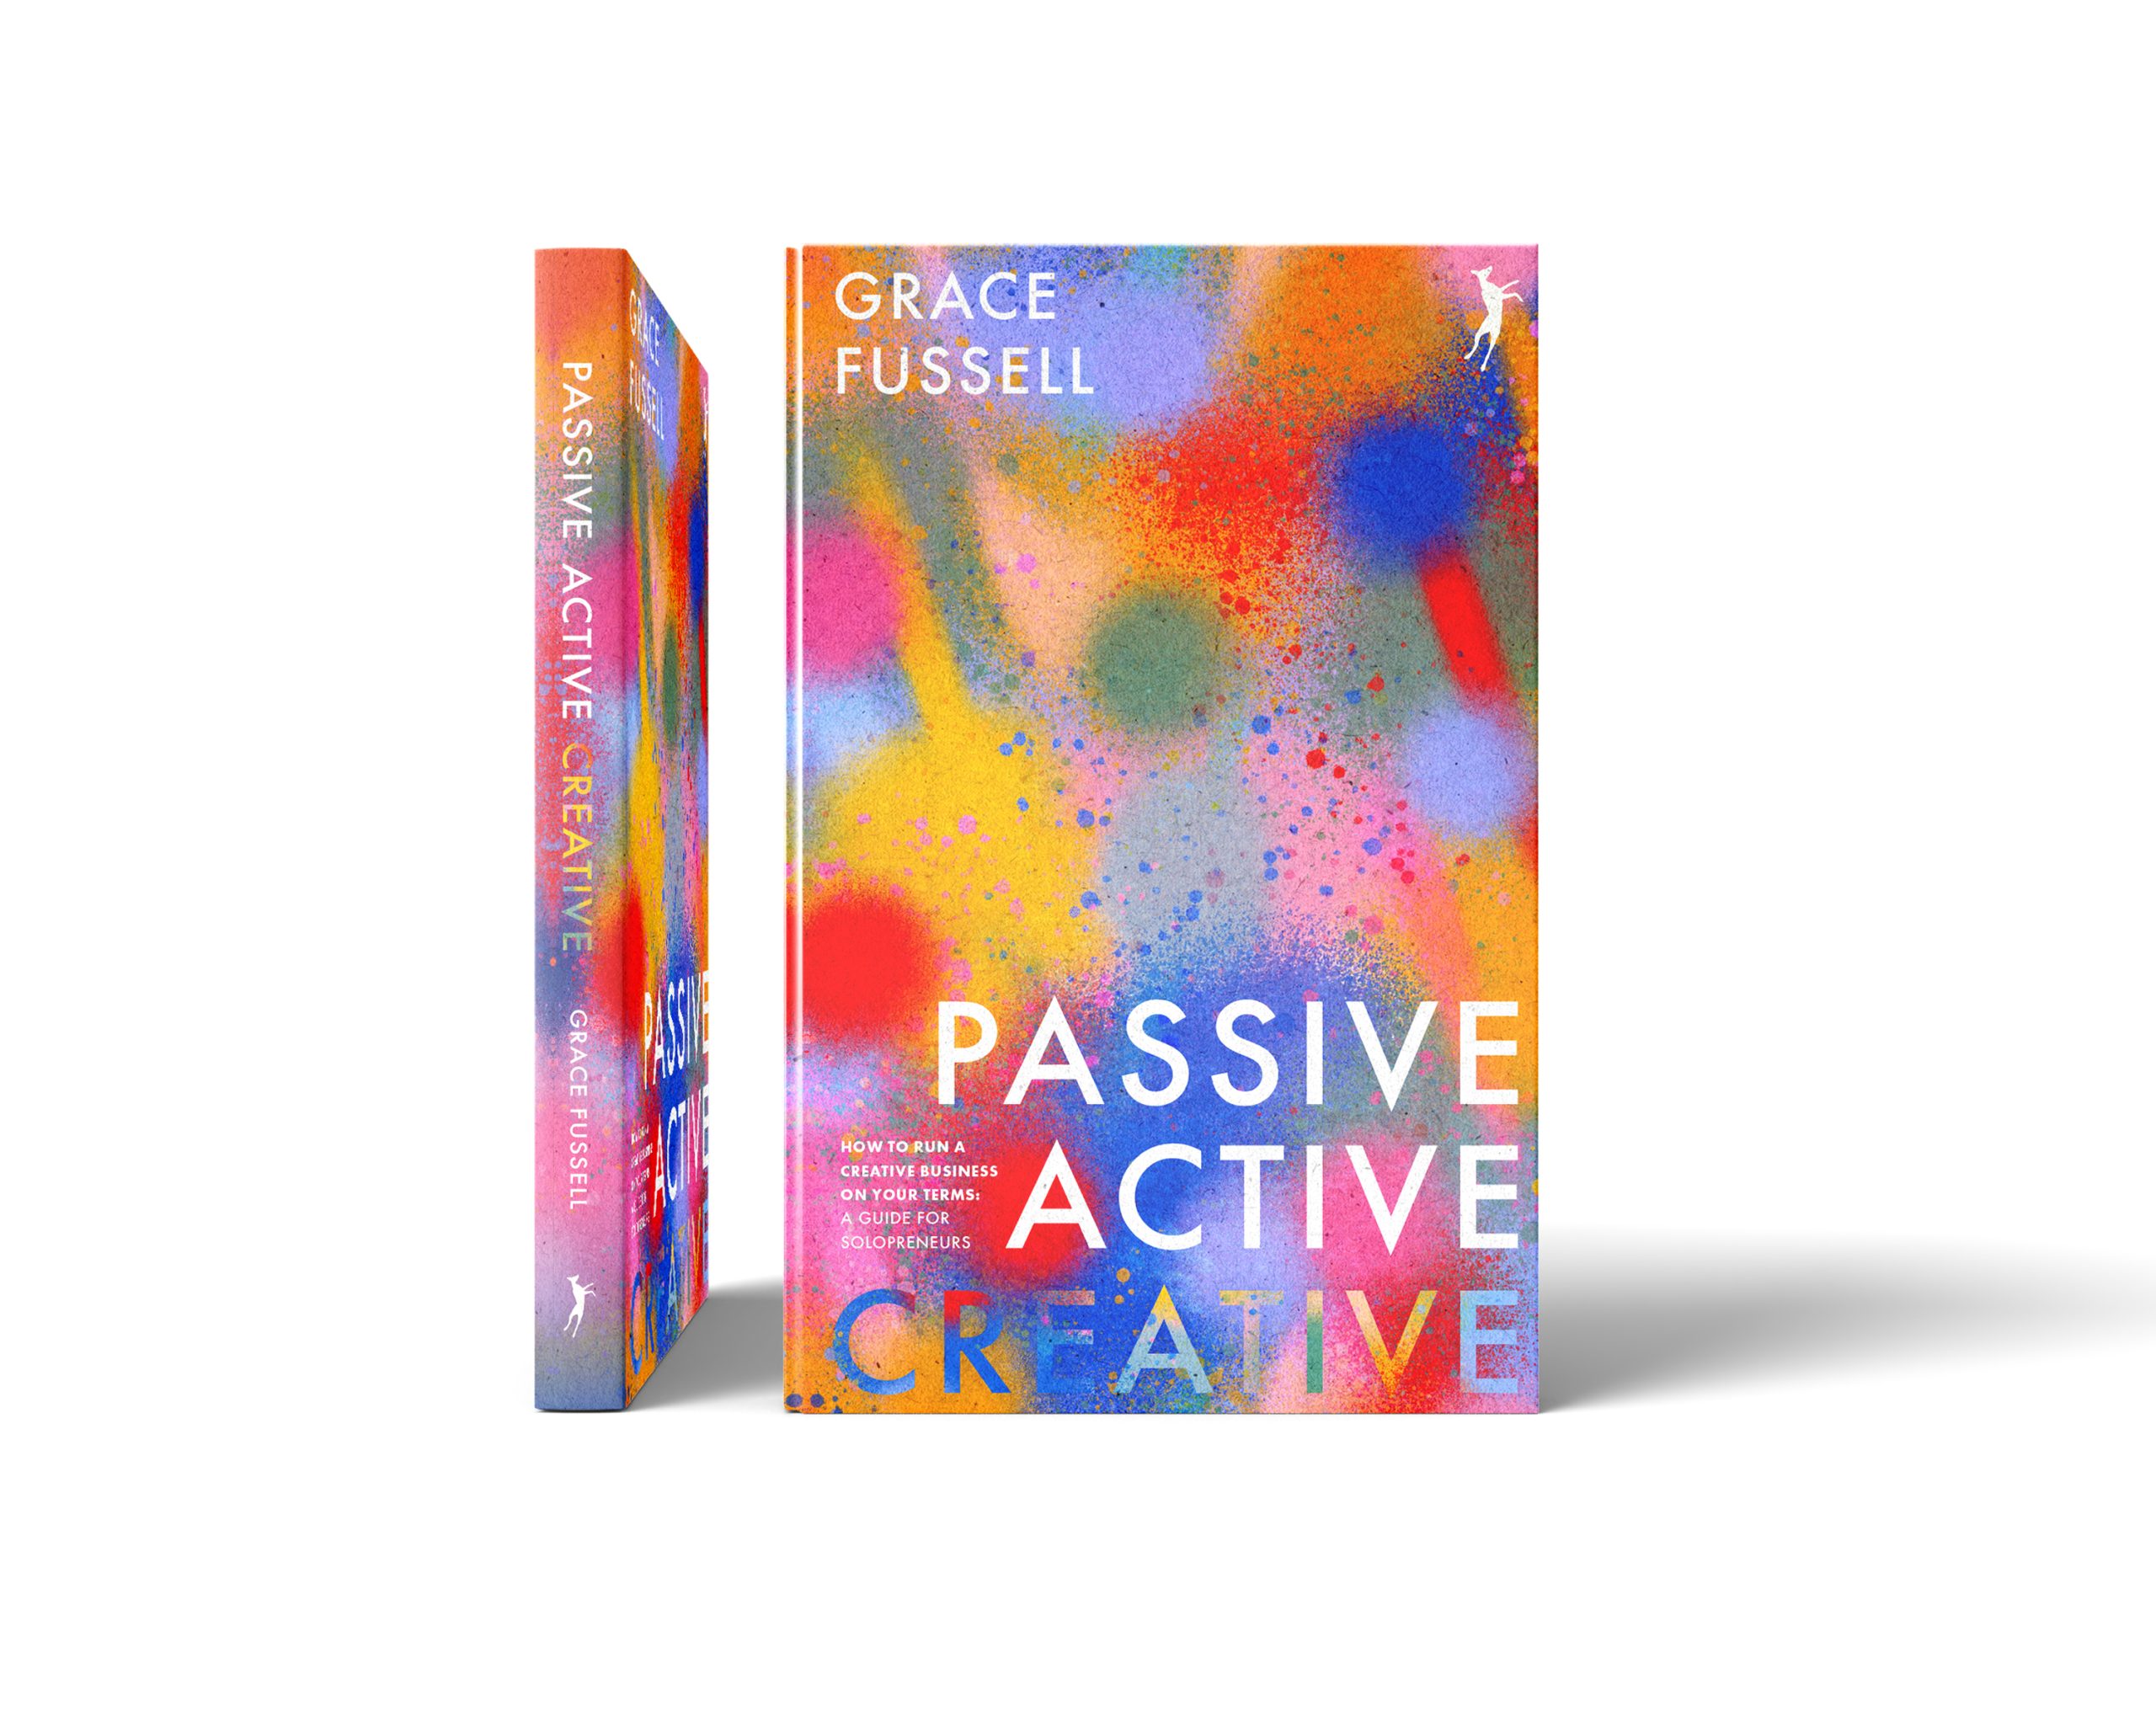 passive active creative business ebook solopreneur creative business book how do I run a creative business Grace Fussell artists business designers business